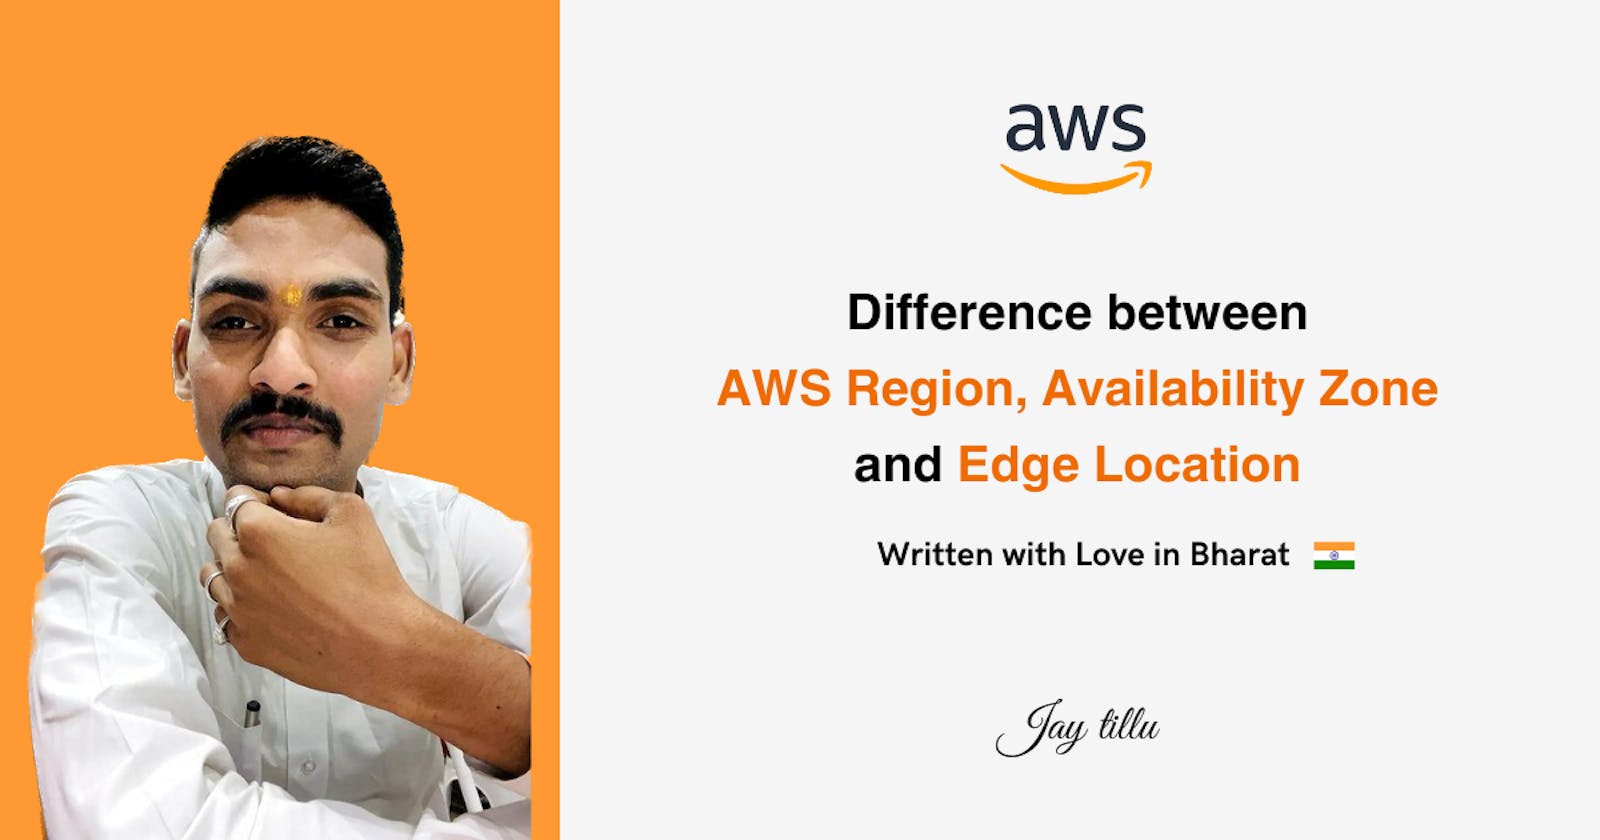 Difference between AWS Region, Availability Zones and Edge Locations